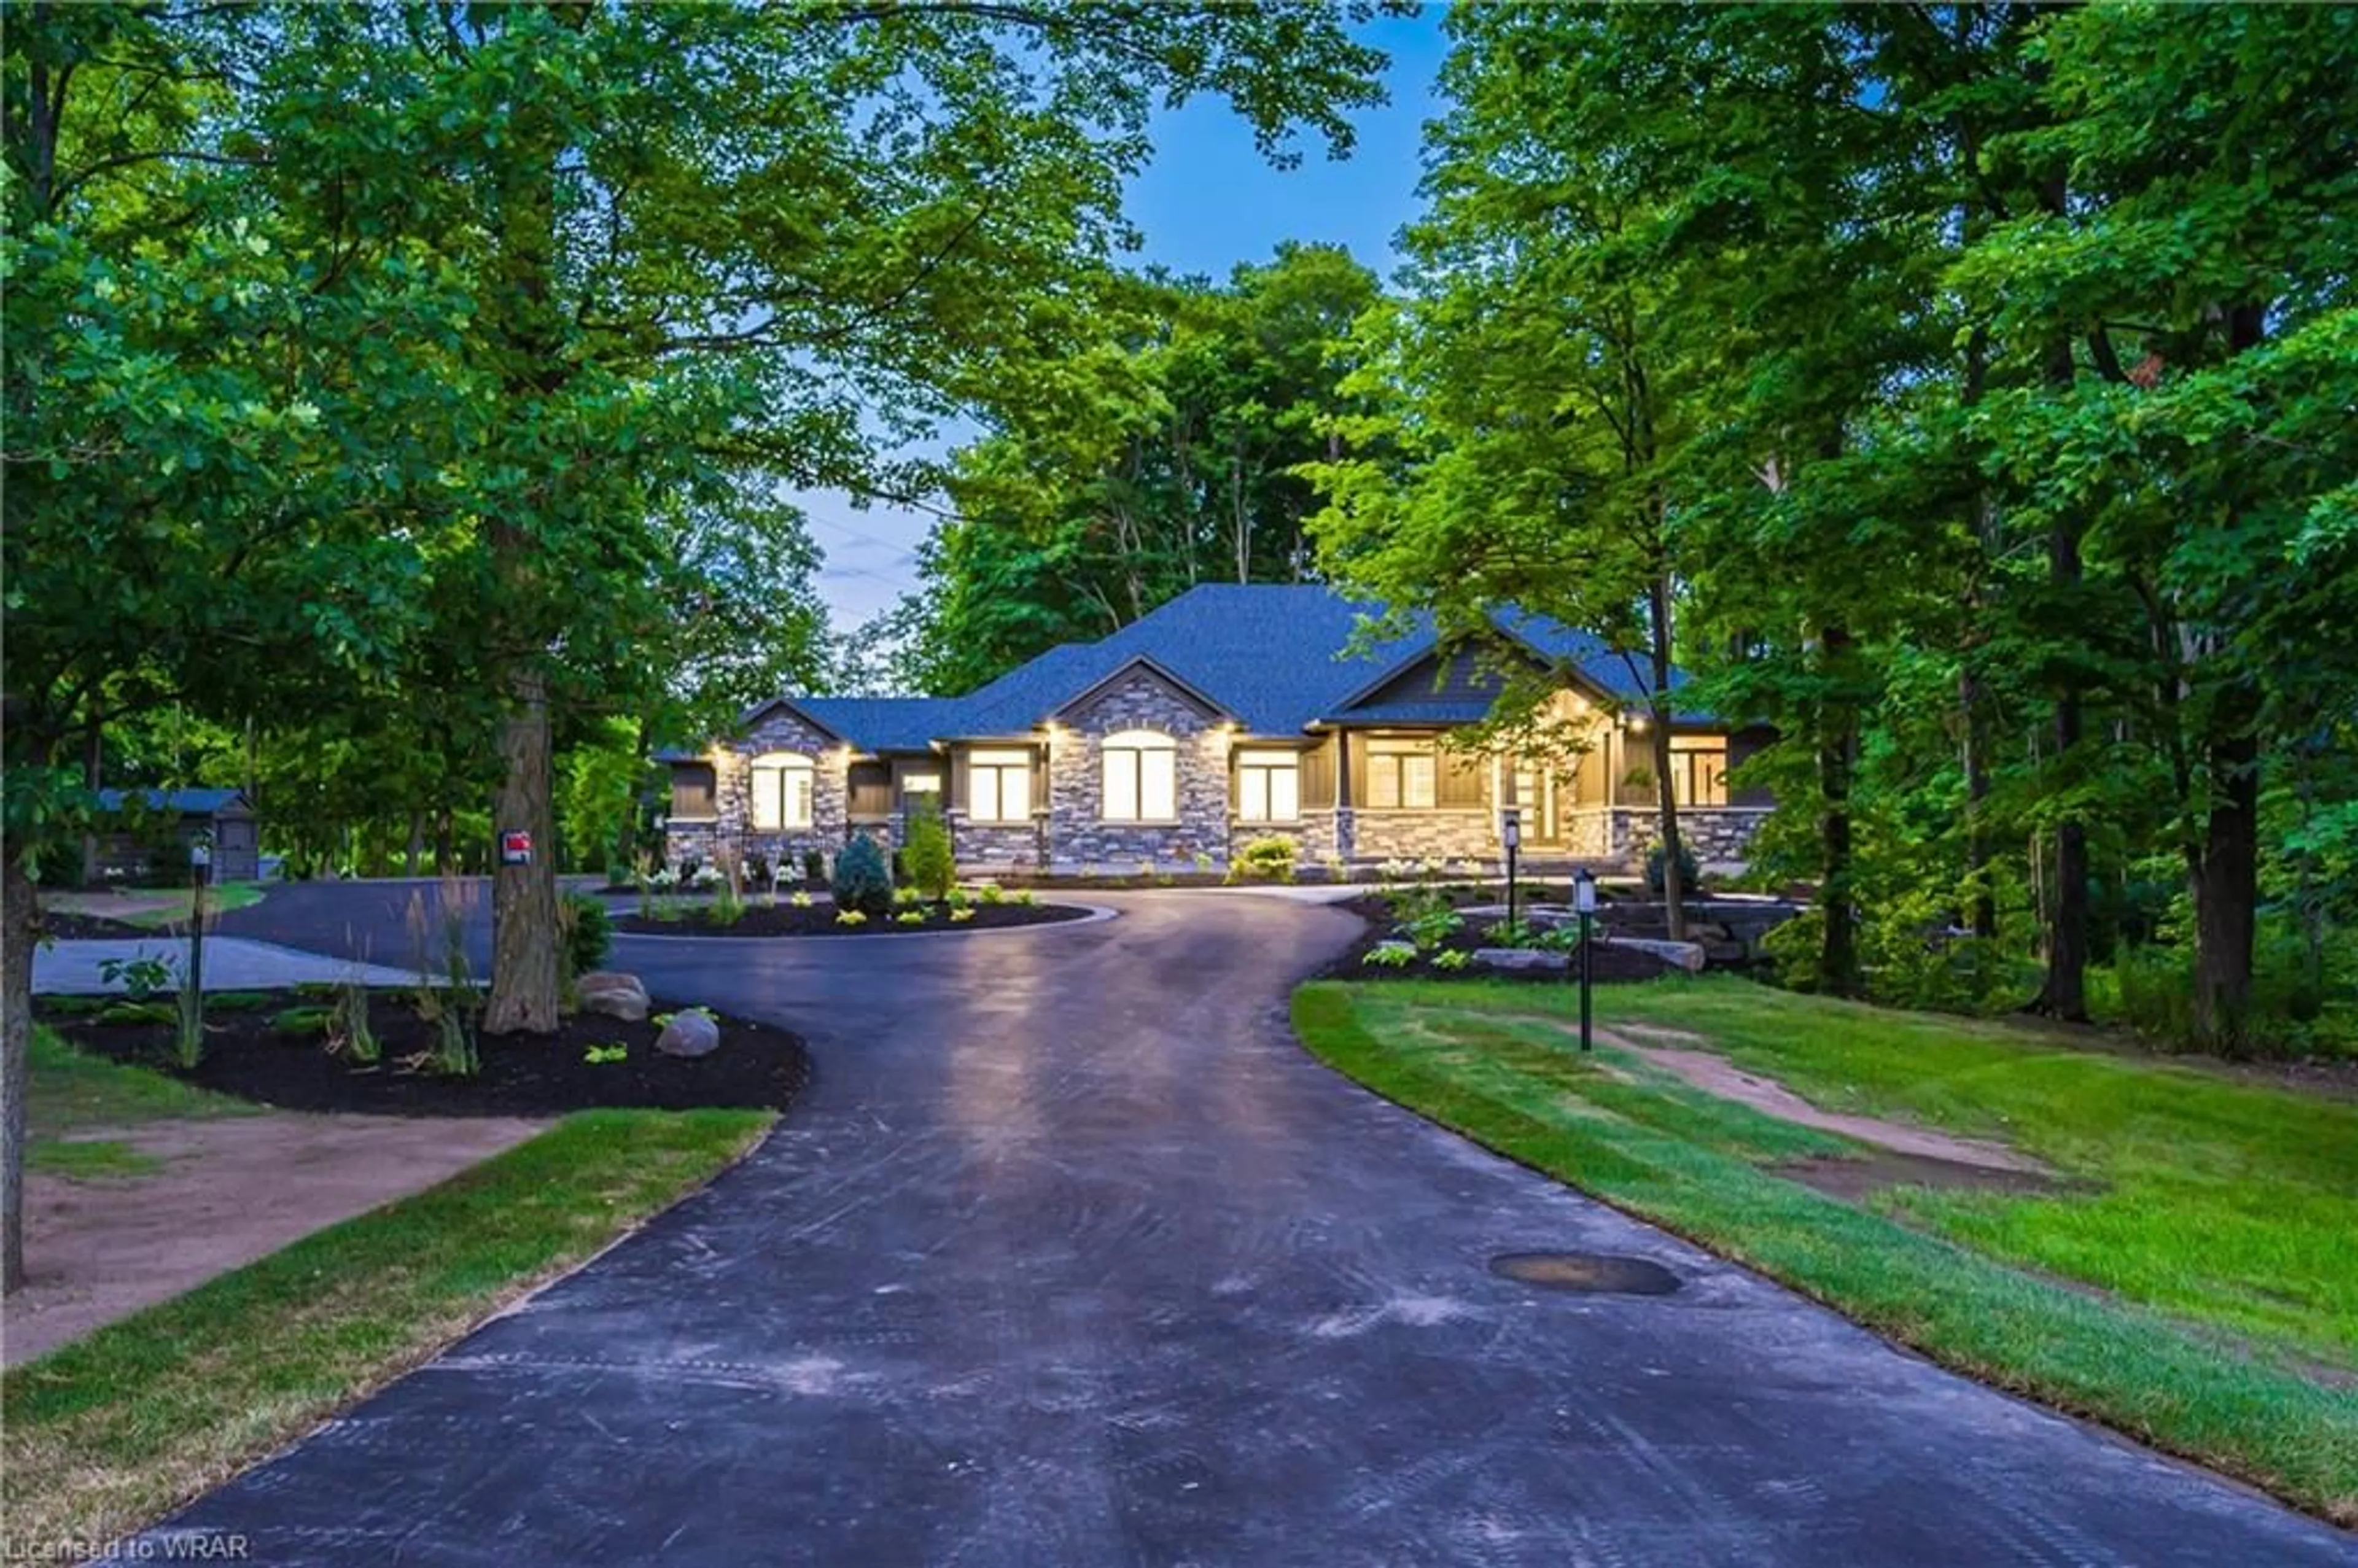 Outside view for 3273 Sandhills Rd, Baden Ontario N3A 3B8